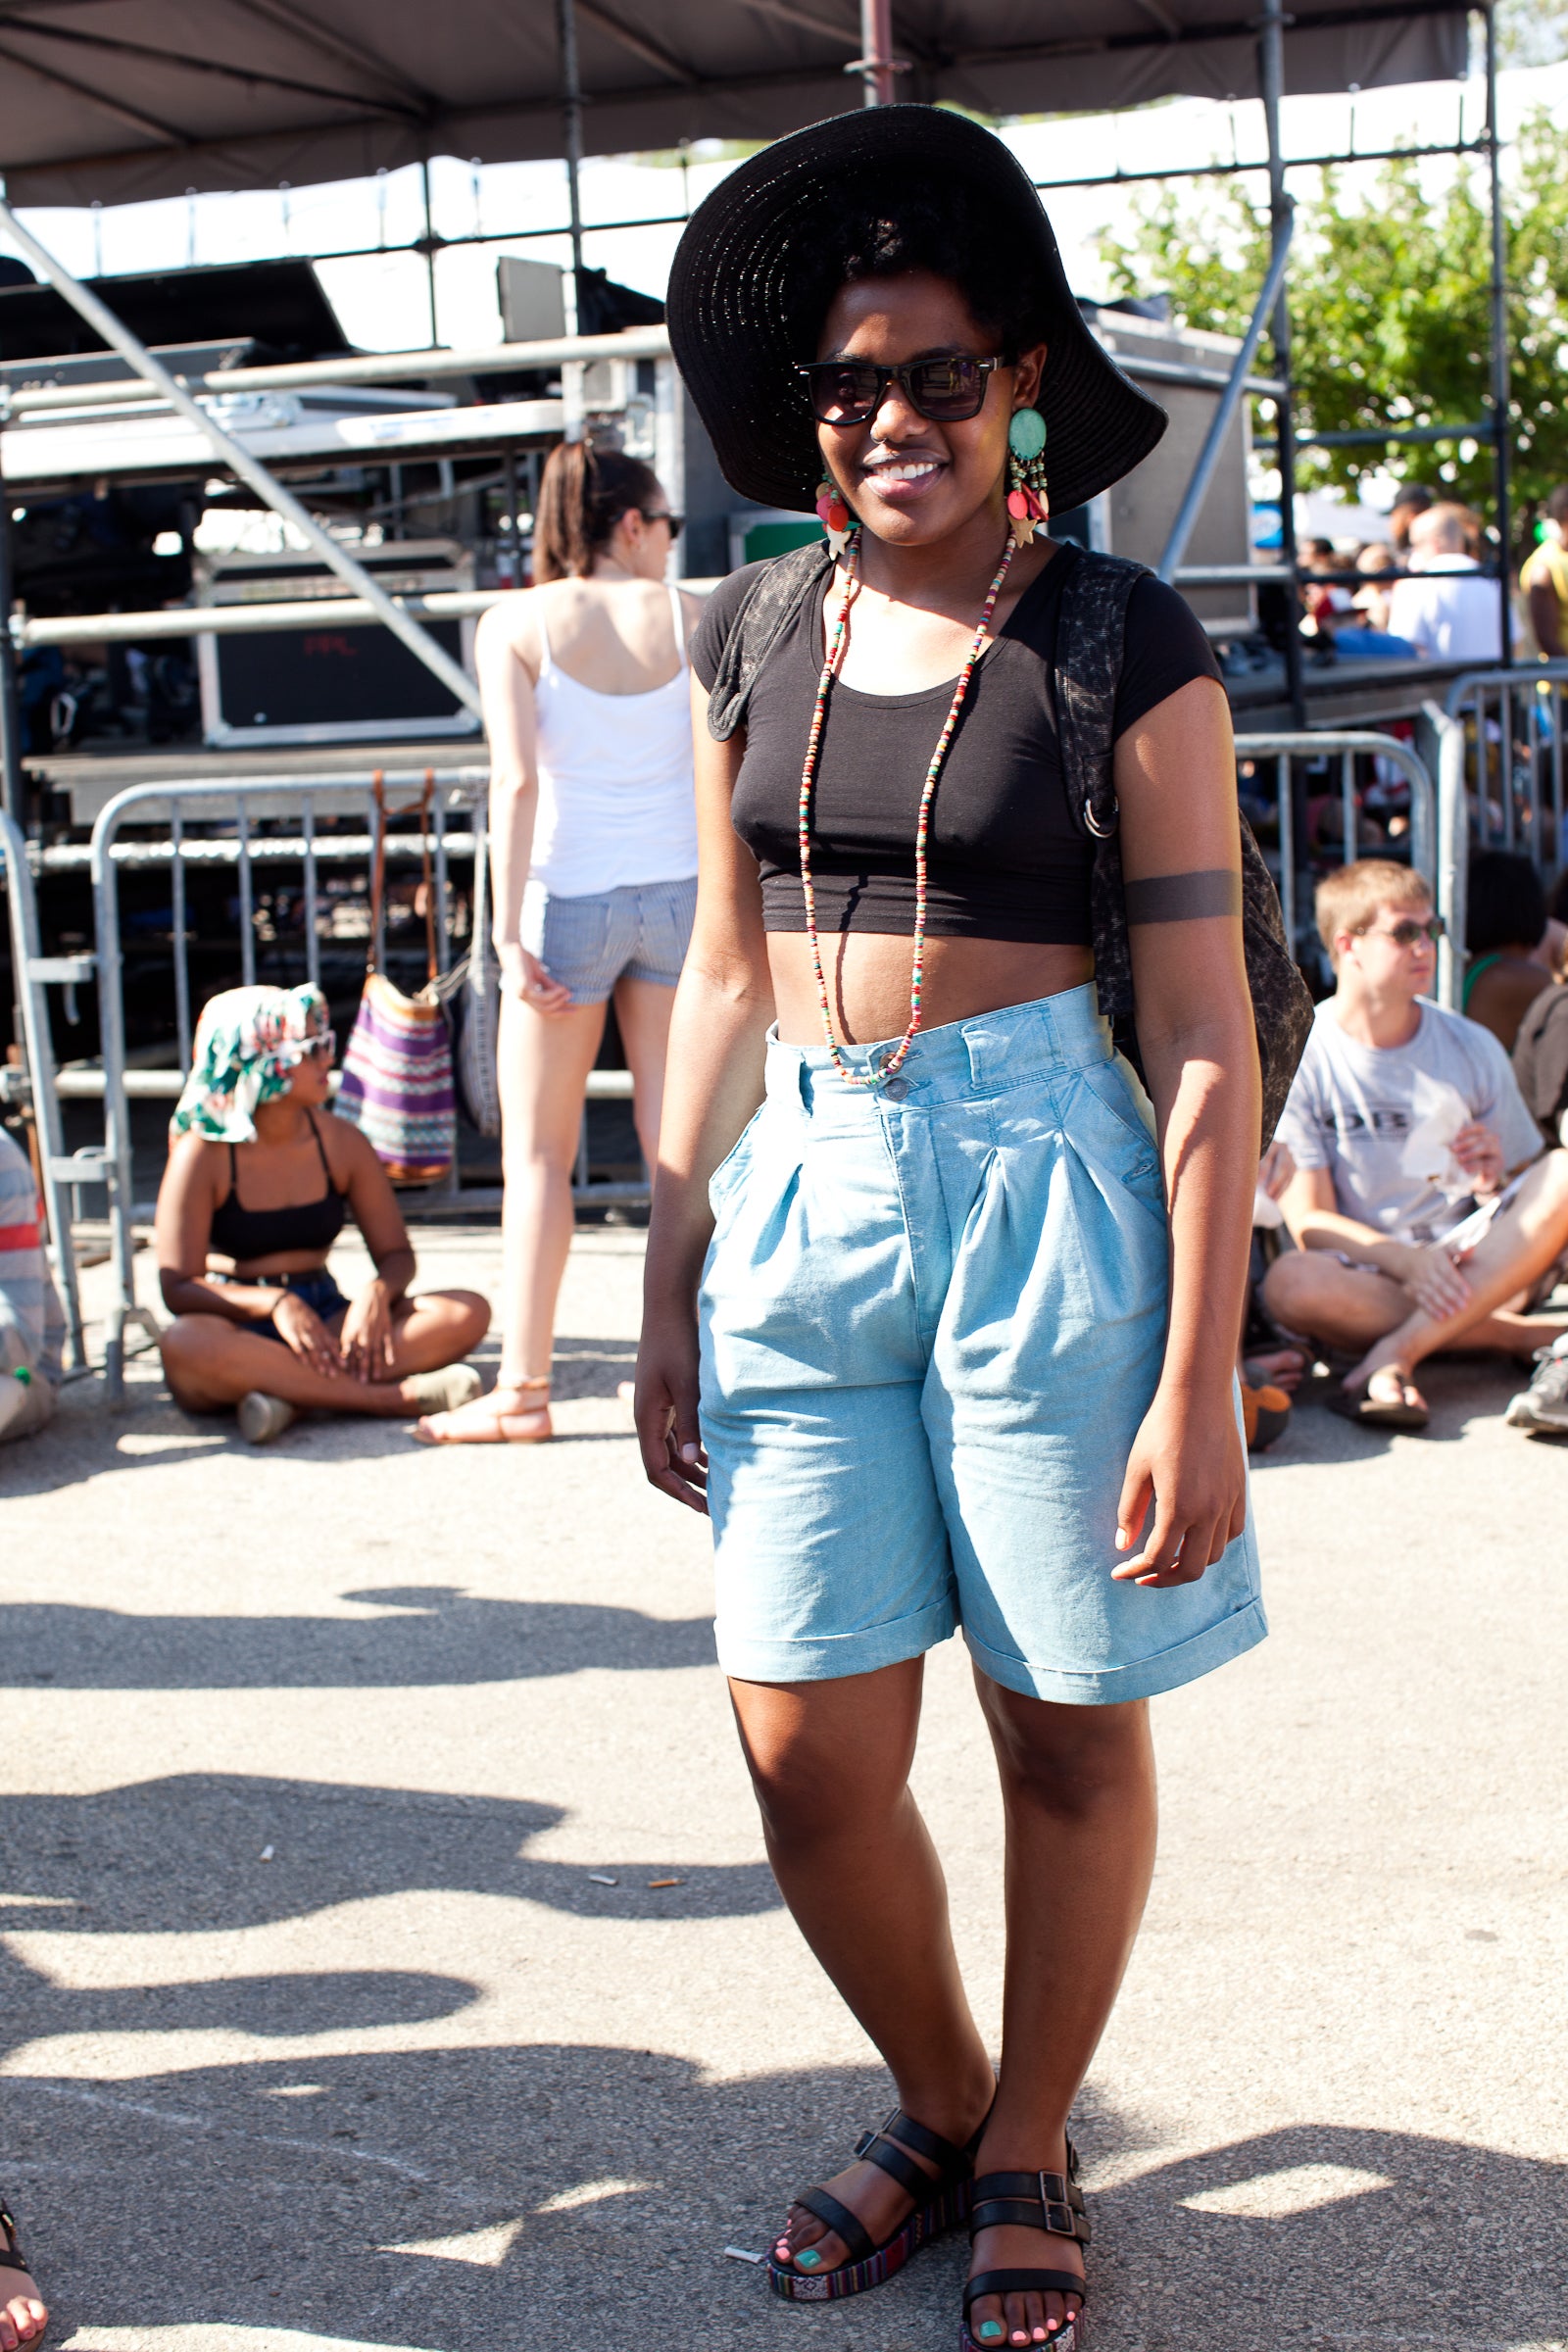 #ThrowbackThursday: Roots Picnic Street Style